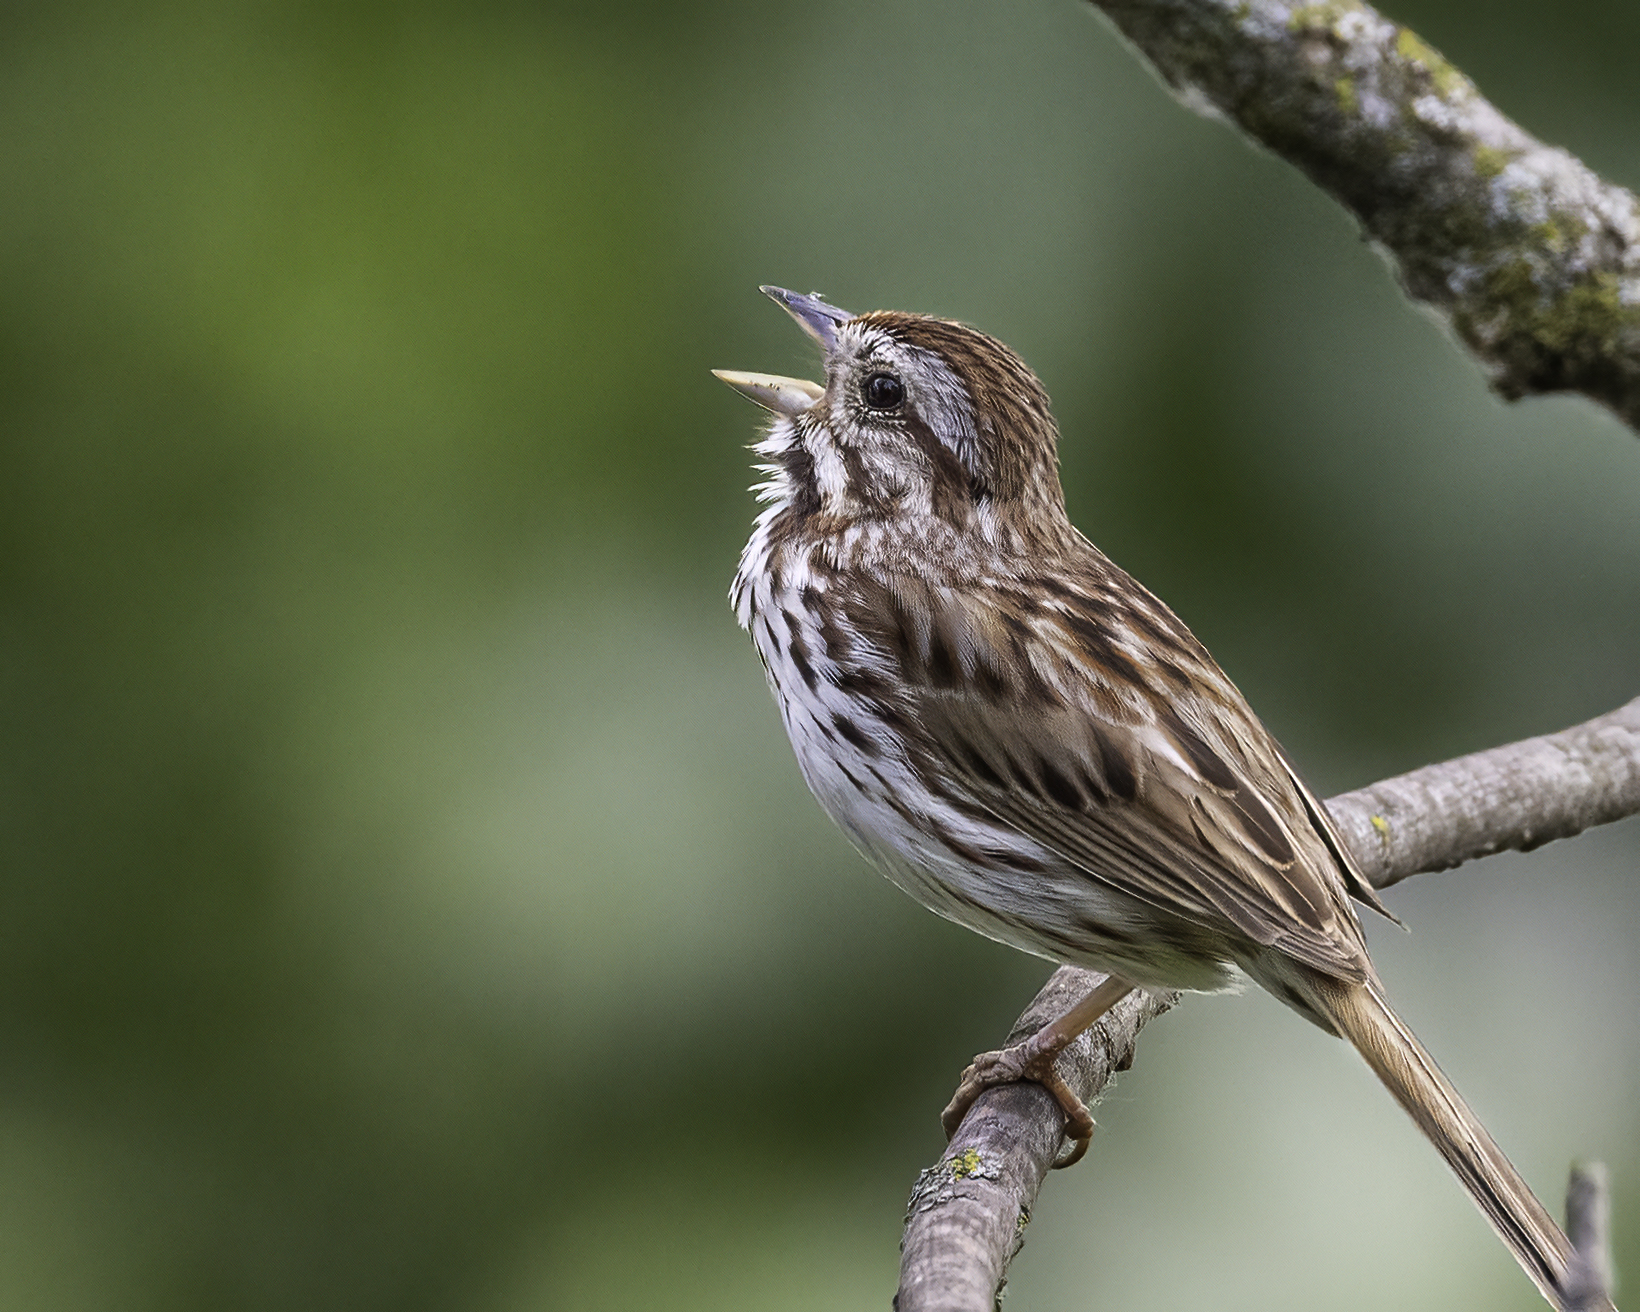 A song sparrow perched on a branch